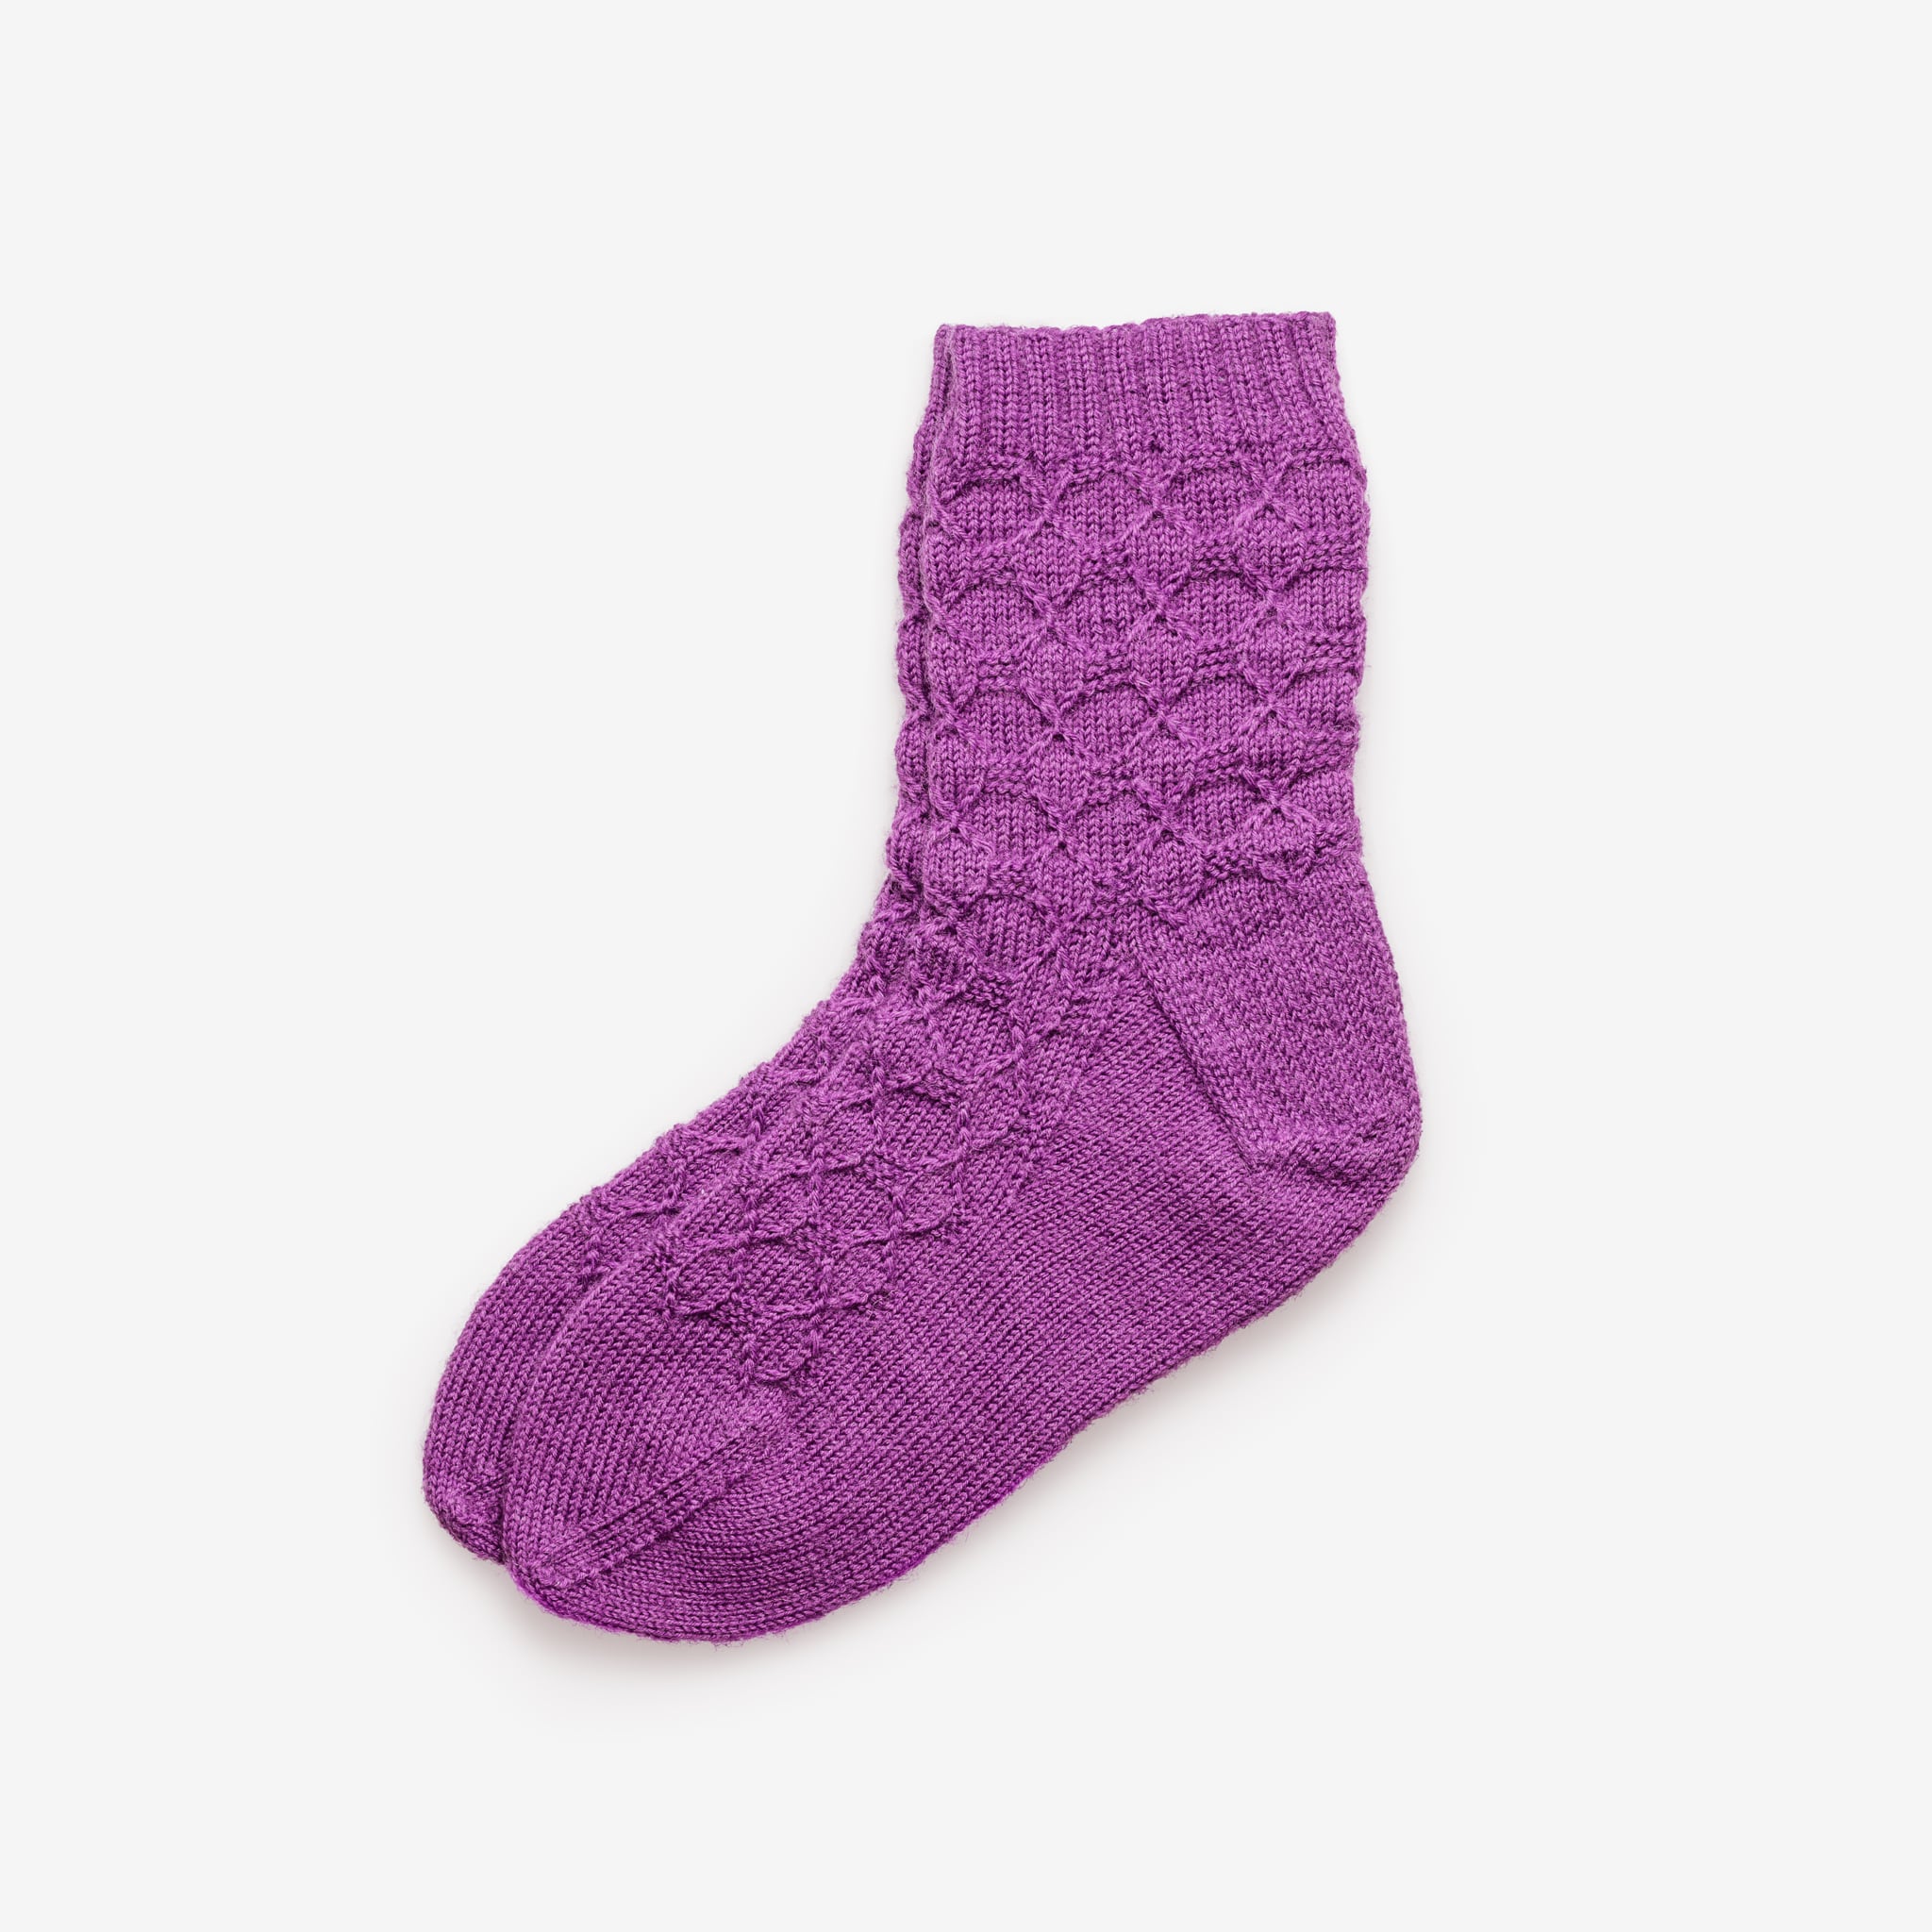 Clean Isolated PSD image of Wool socks on transparent background with separated shadow